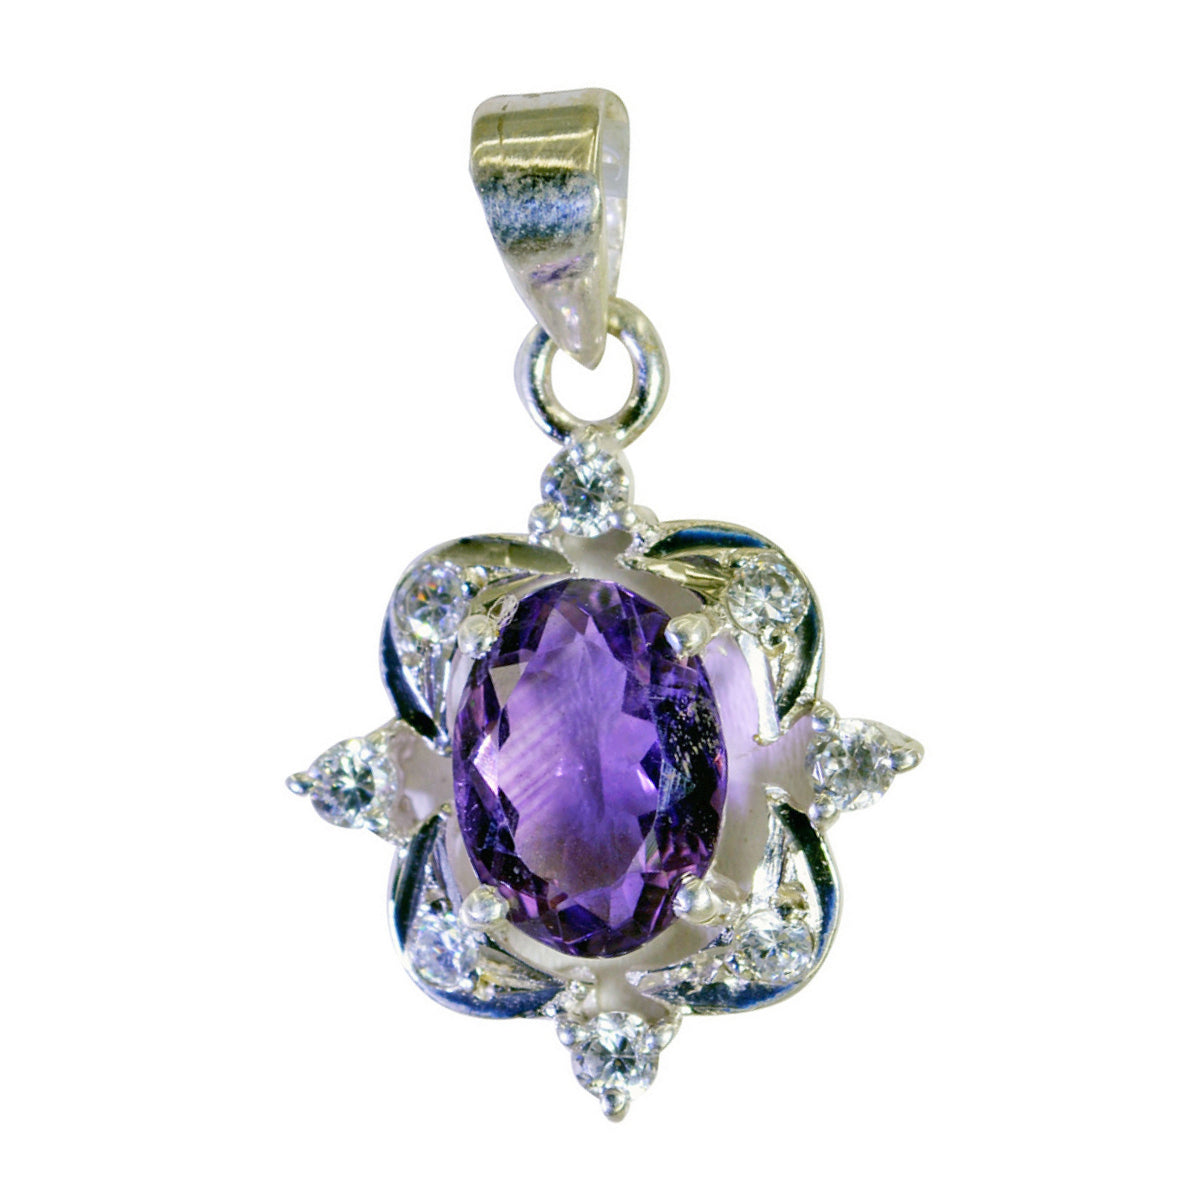 Riyo Foxy Gems Oval Faceted Purple Amethyst Silver Pendant Gift For Sister